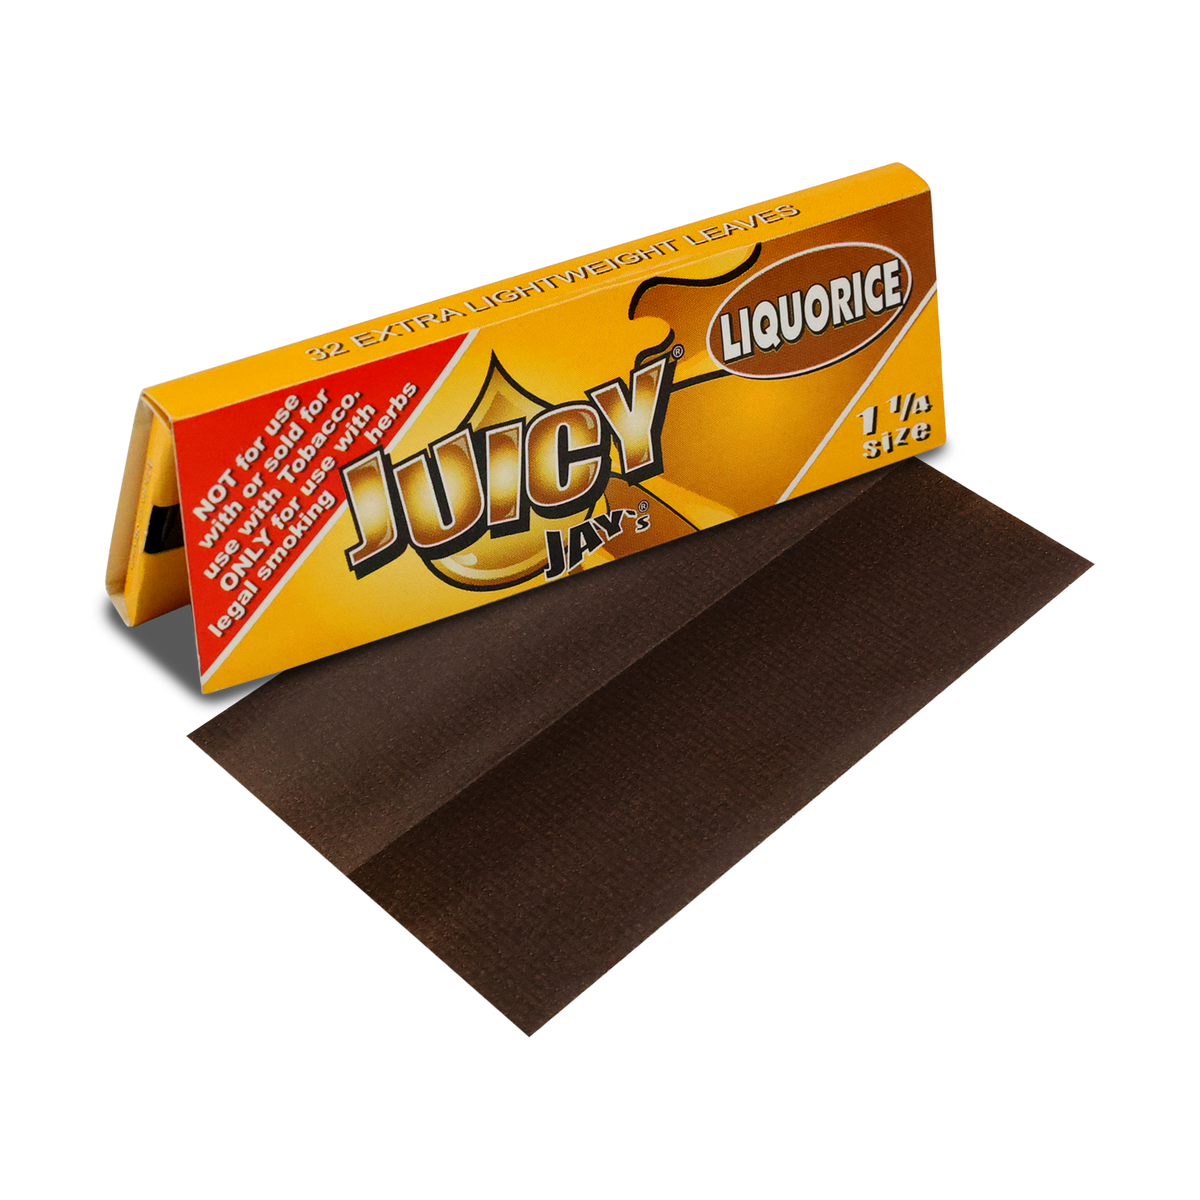 Juicy Jays 1 1/4 Liquorice Flavored Hemp Rolling Papers Rolling Papers esd-official